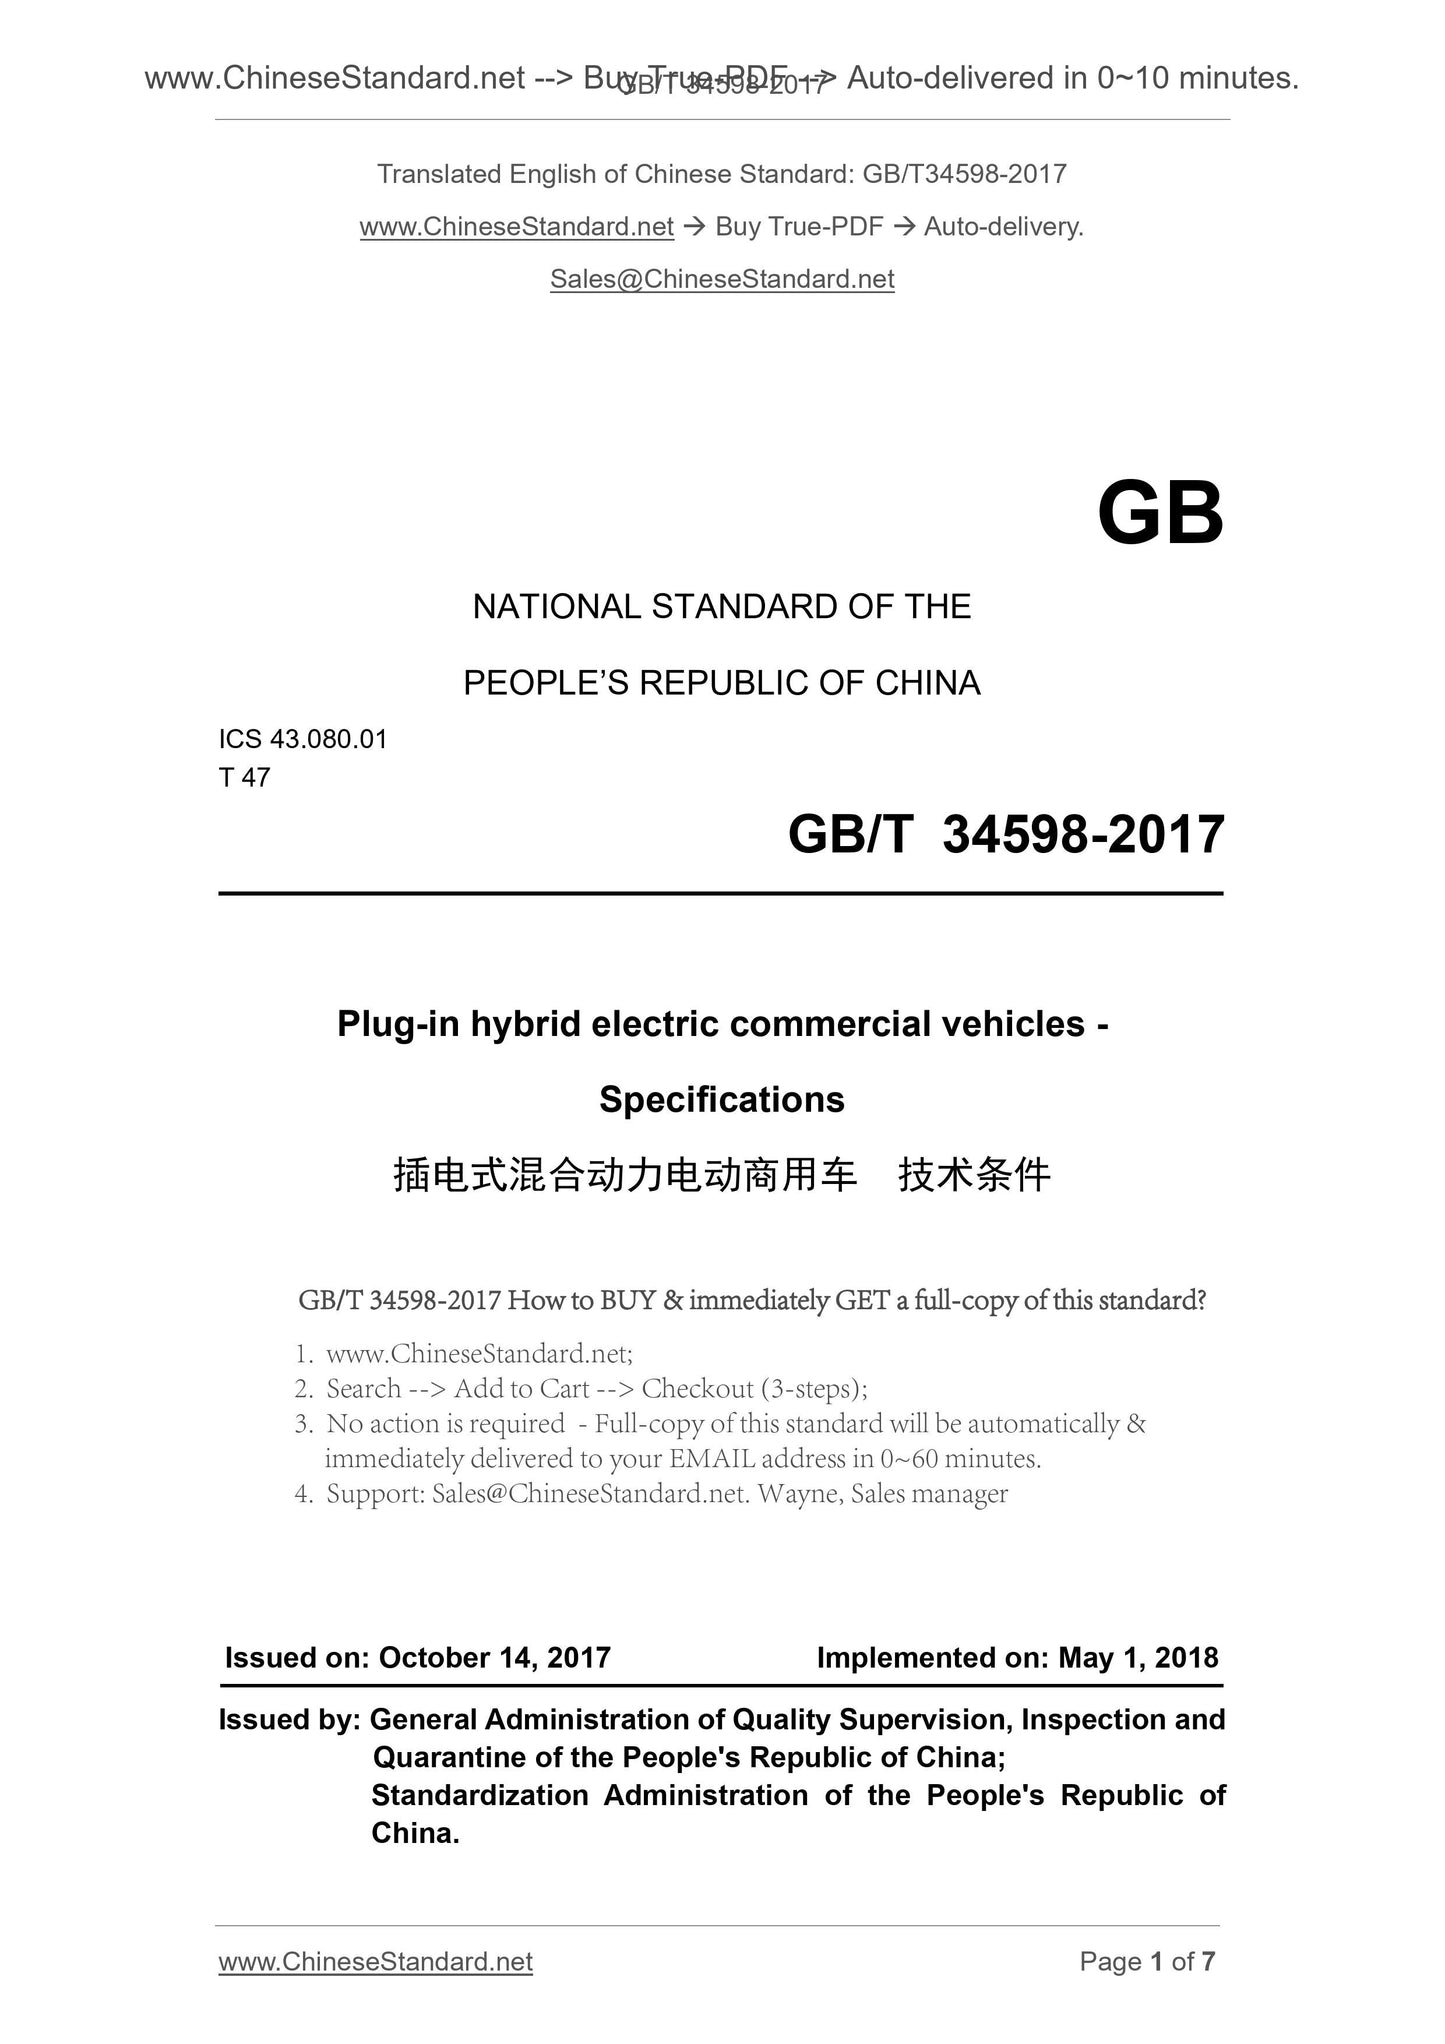 GB/T 34598-2017 Page 1